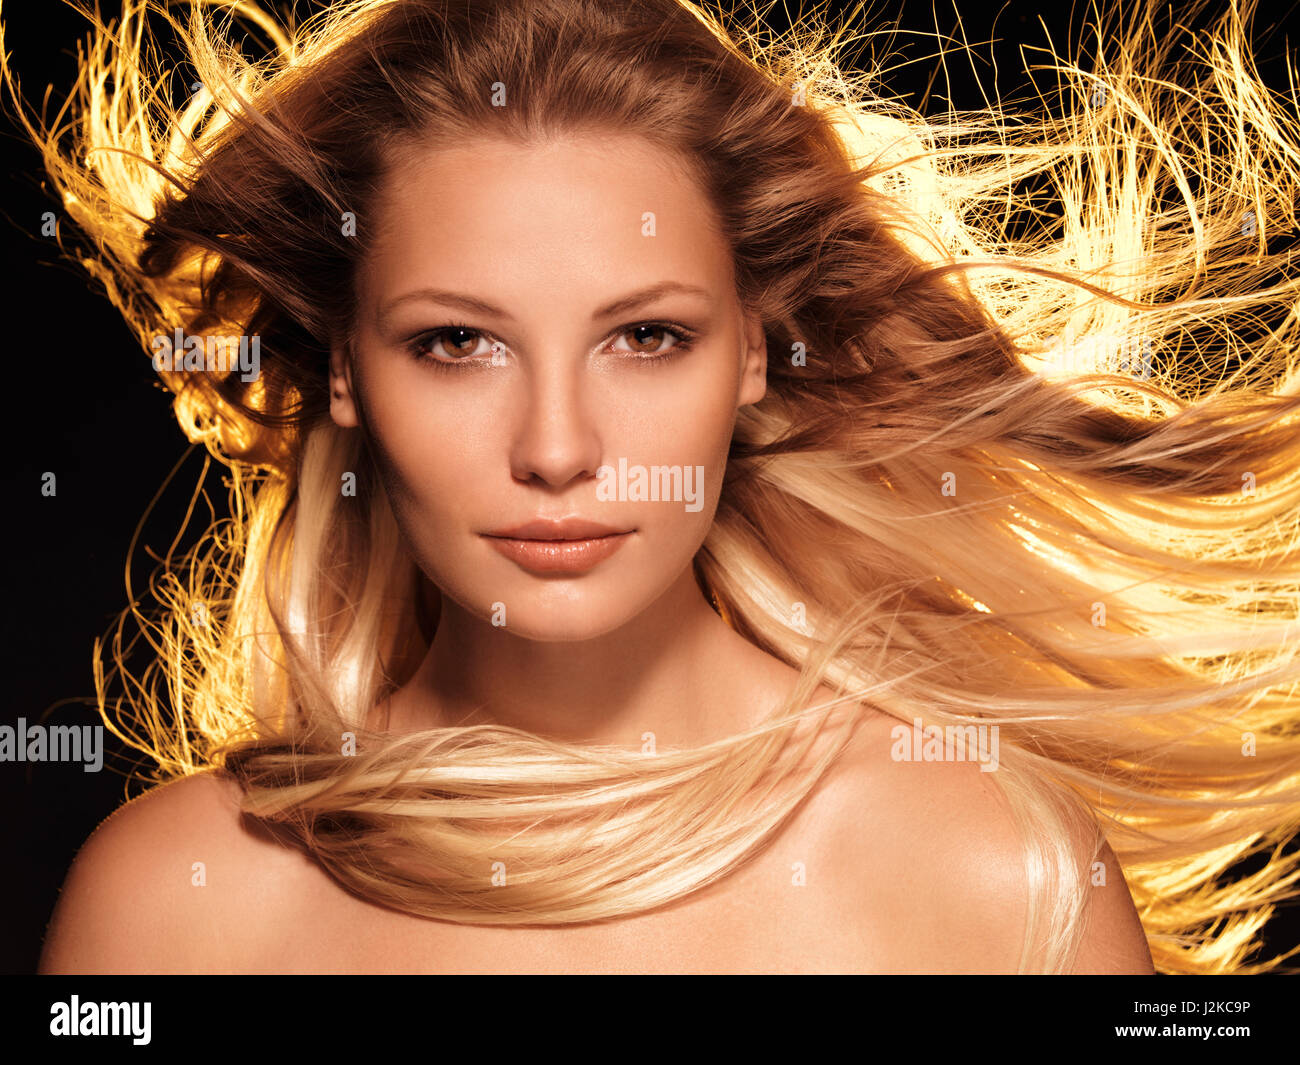 License and prints at MaximImages.com - Beauty face portrait of a woman with long glowing flying golden blond hair front view Stock Photo